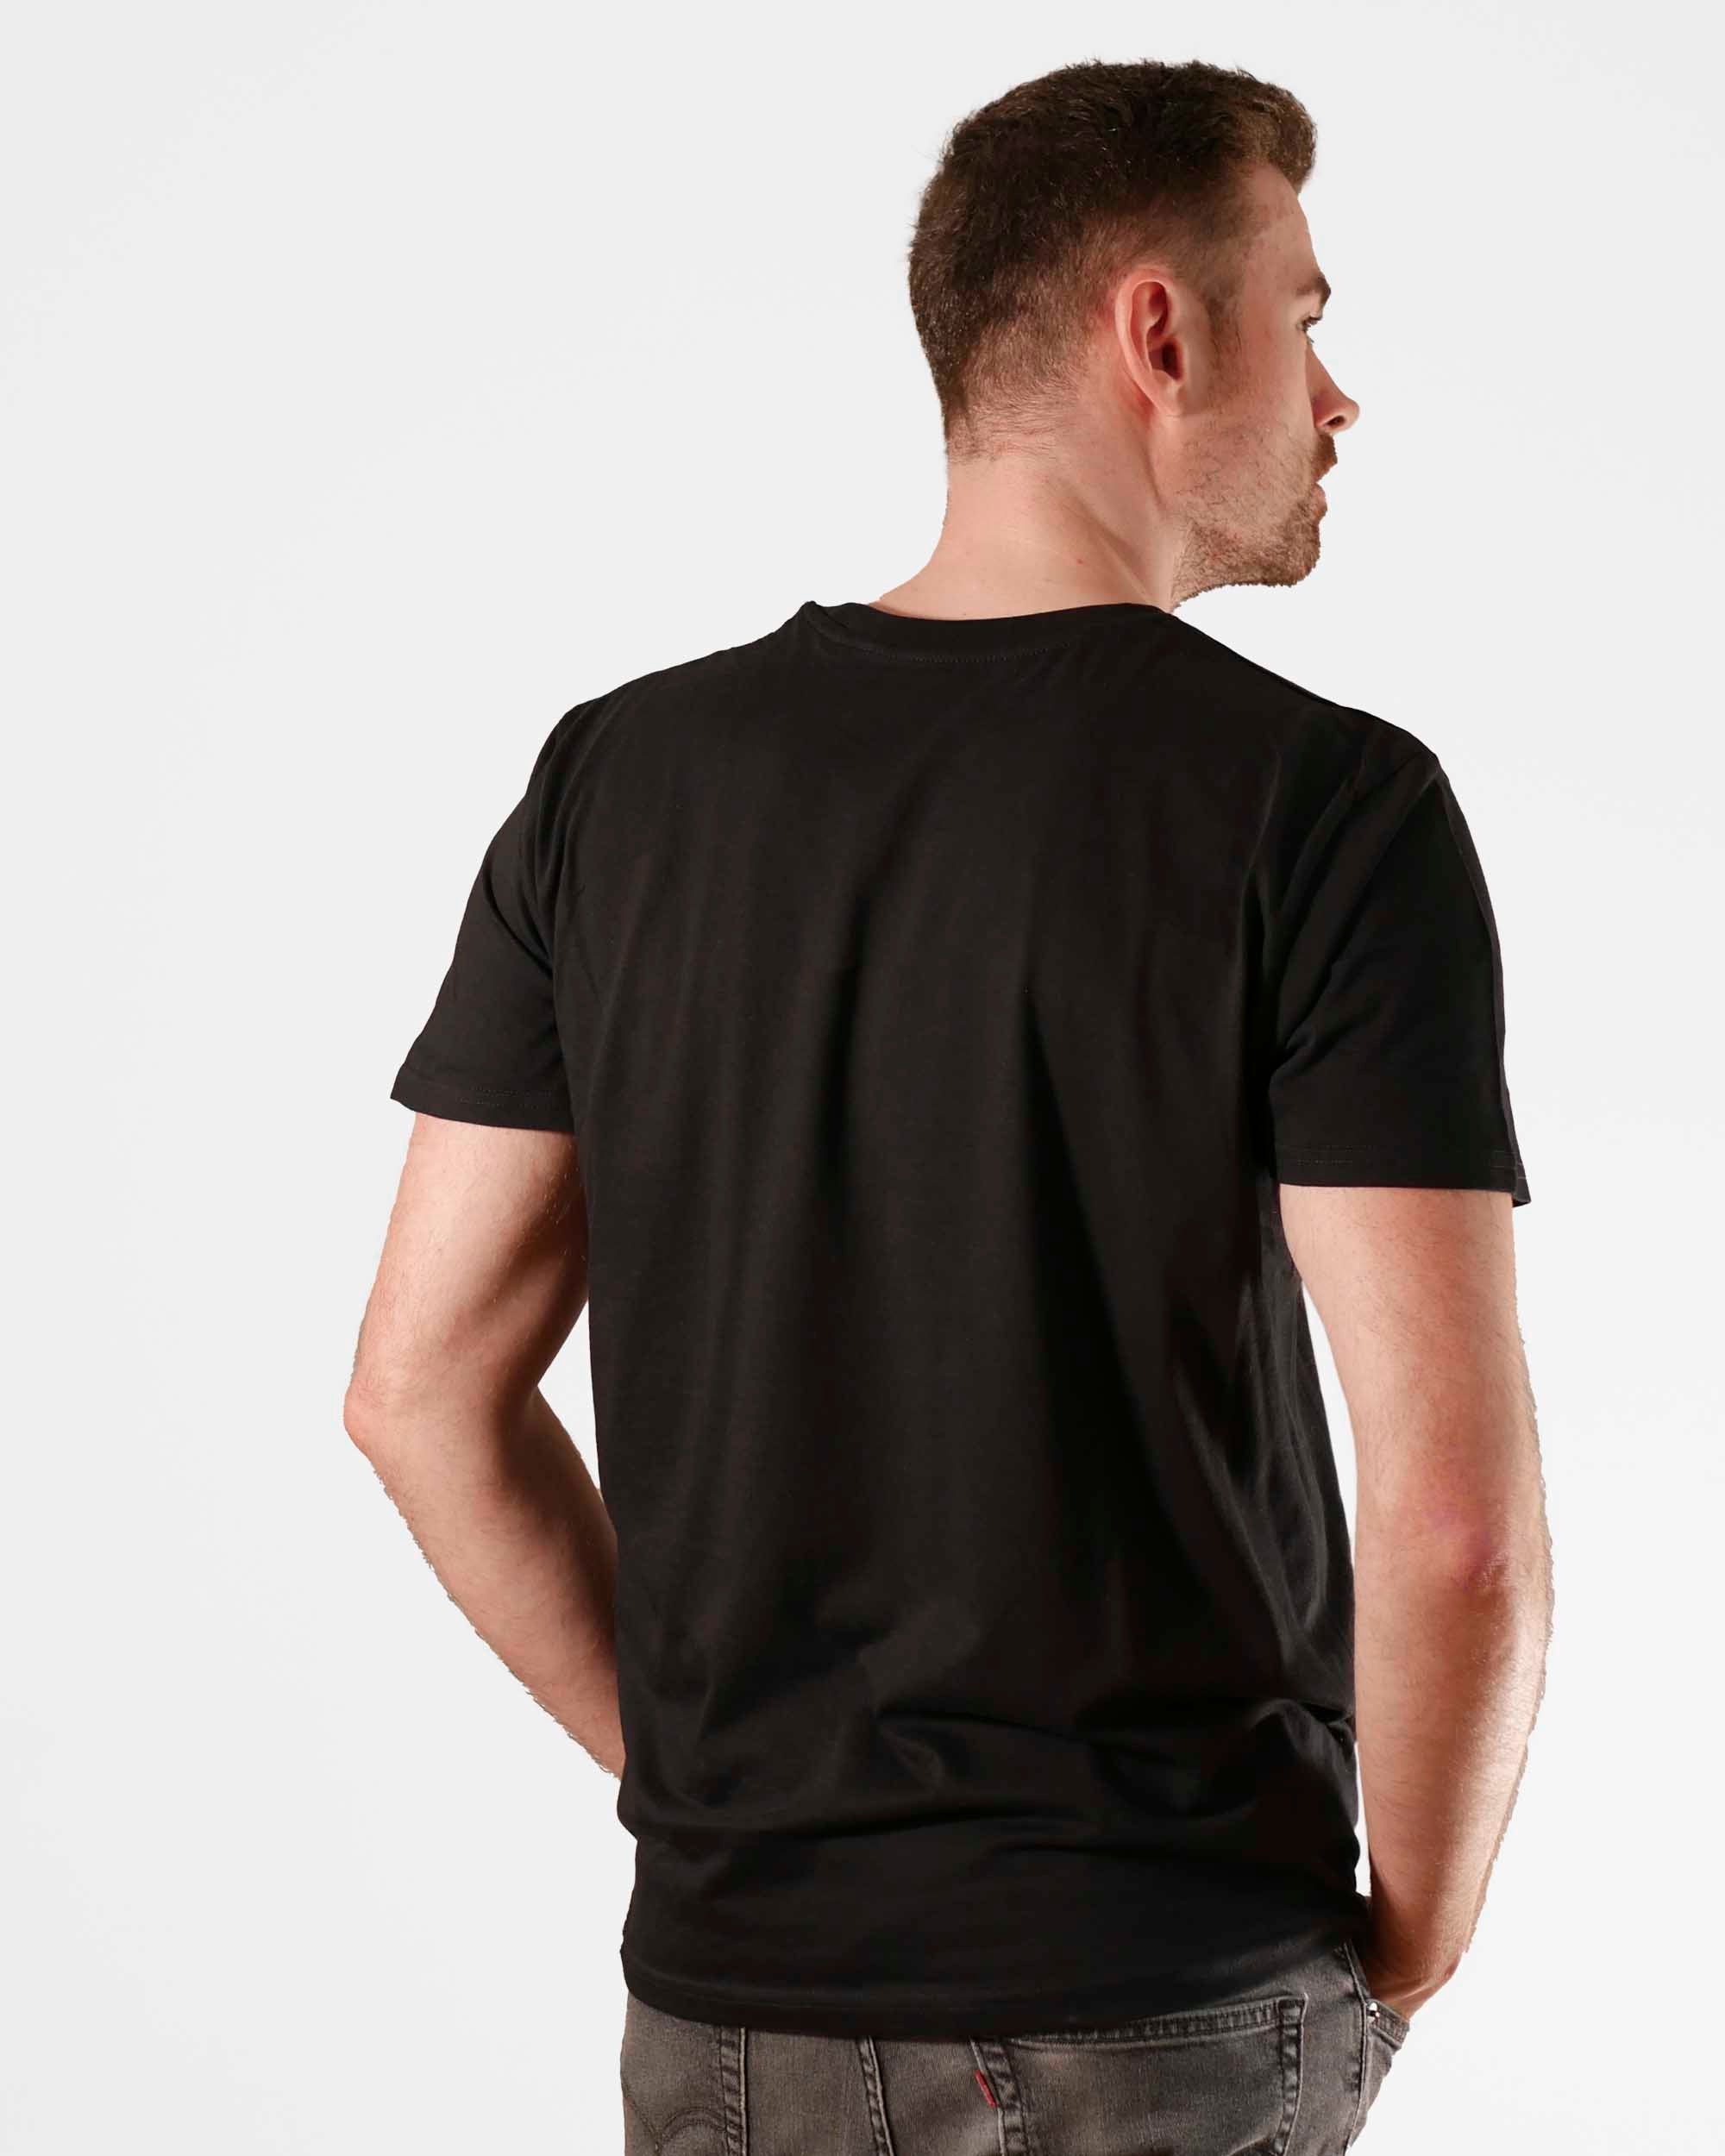 Be Battery | 3-Style T-Shirt